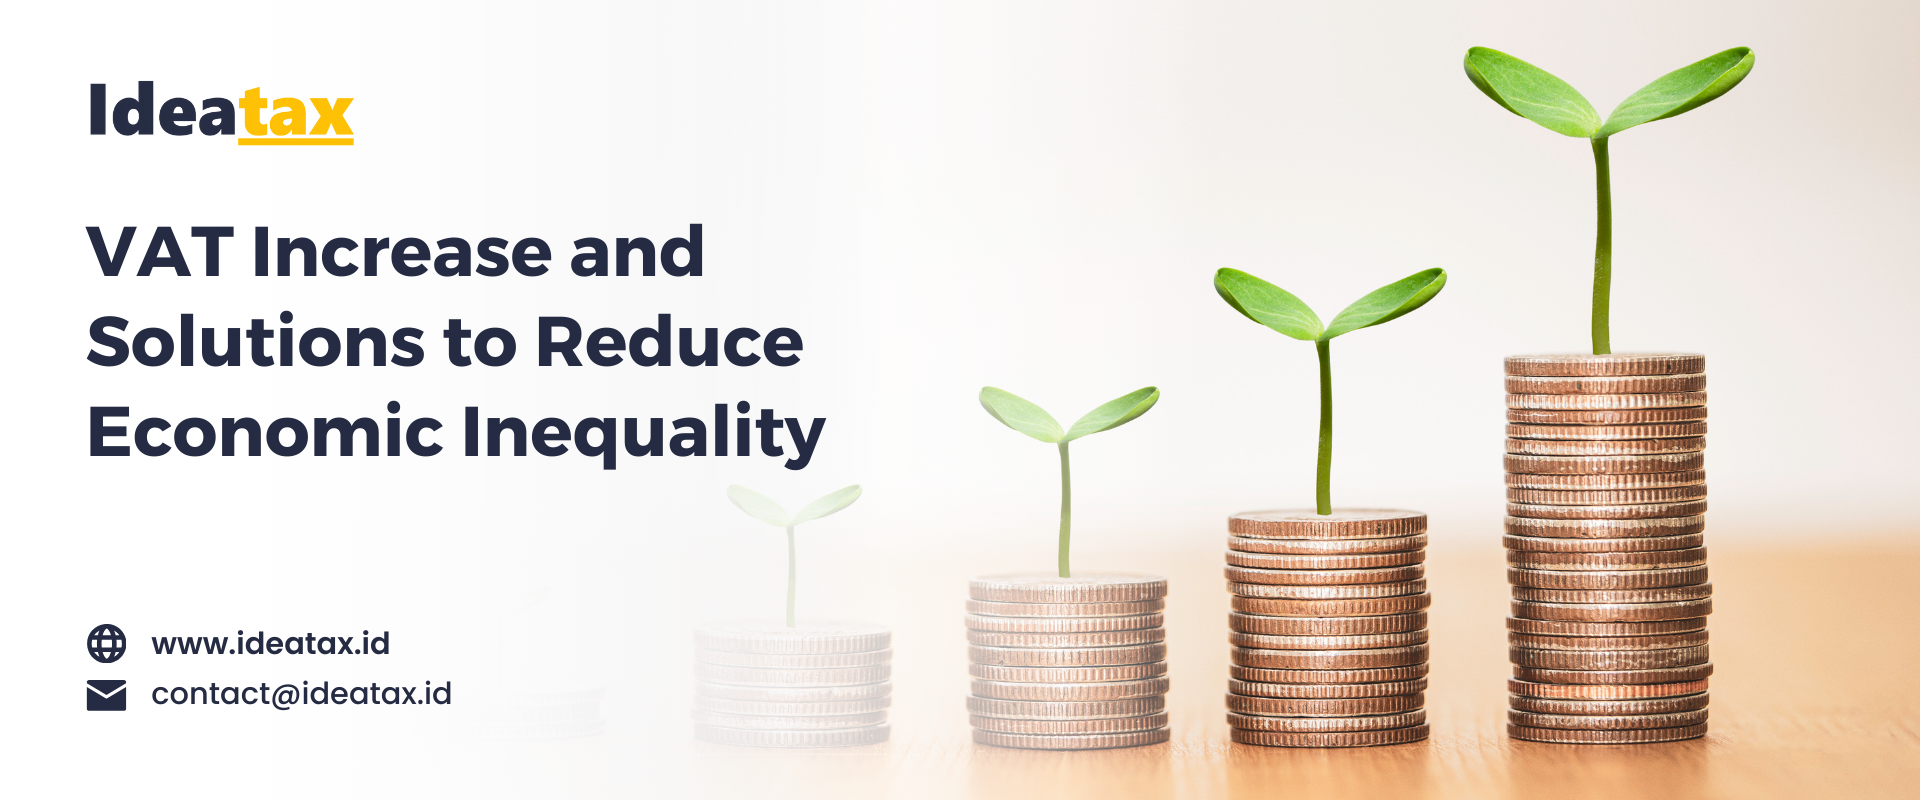 VAT Increase and Solutions to Reduce Economic Inequality